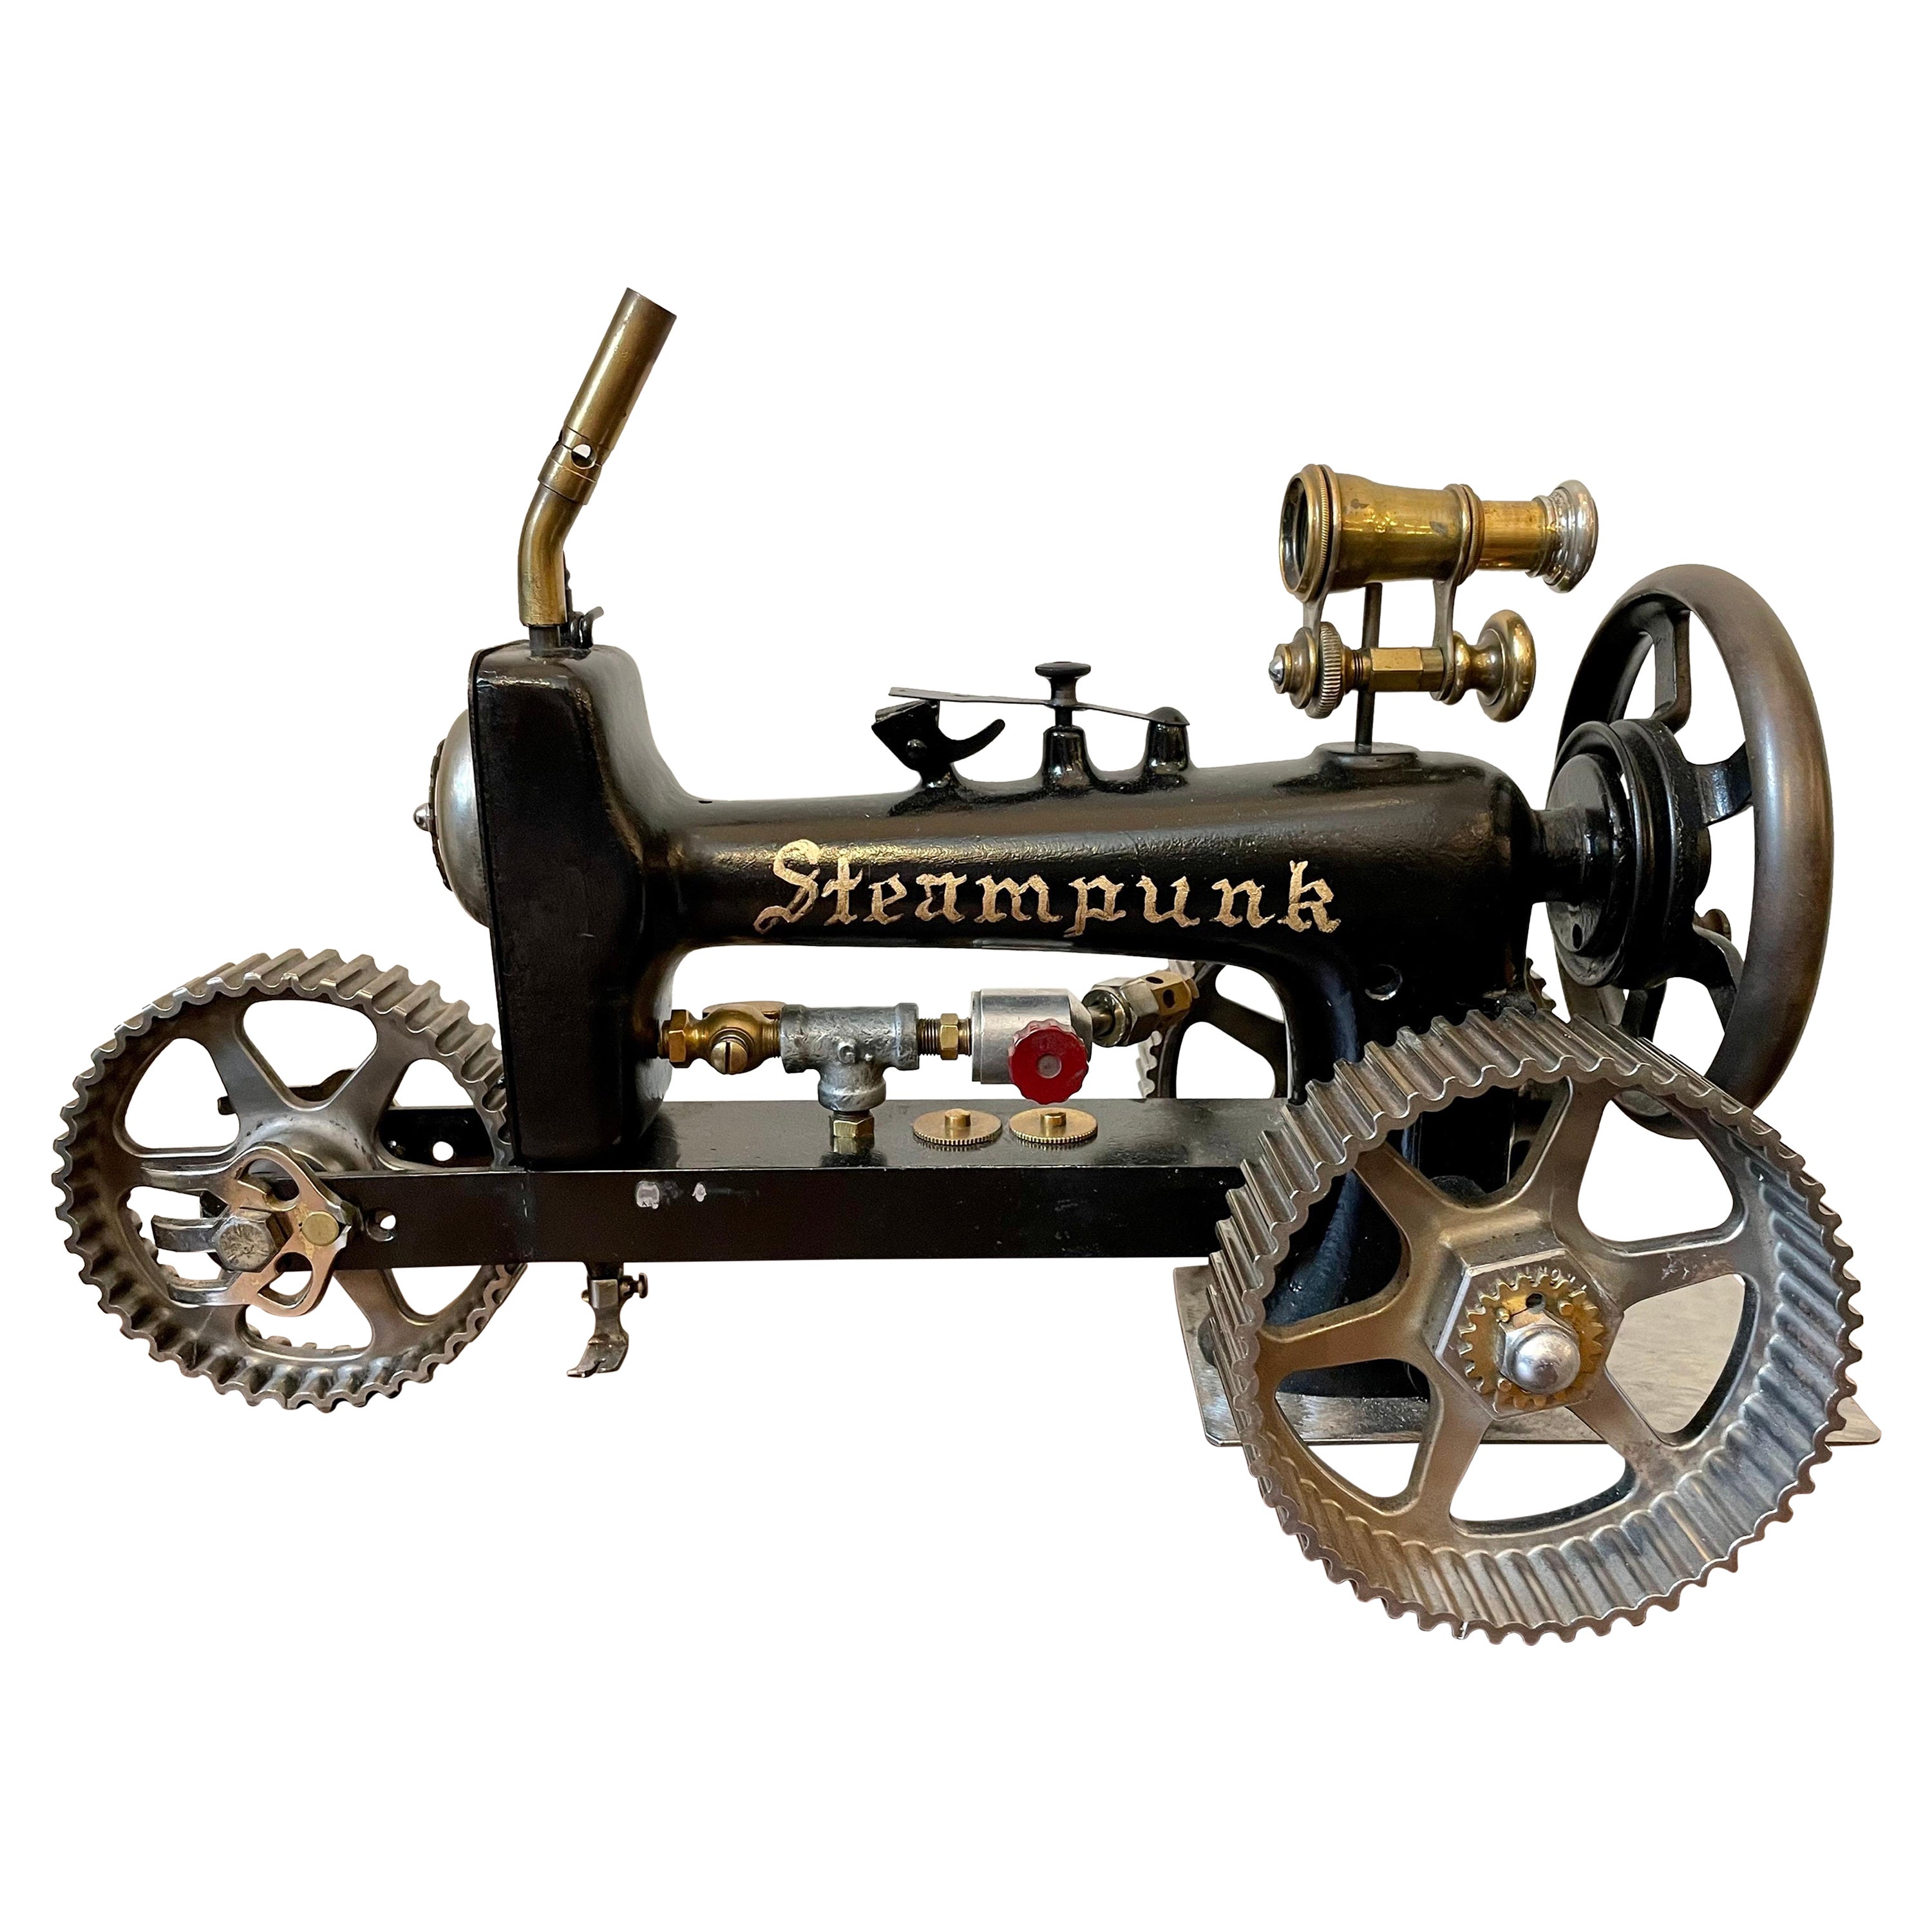 Whimsically Crafted "Steampunk" Sewing Machine Tractor Sculpture